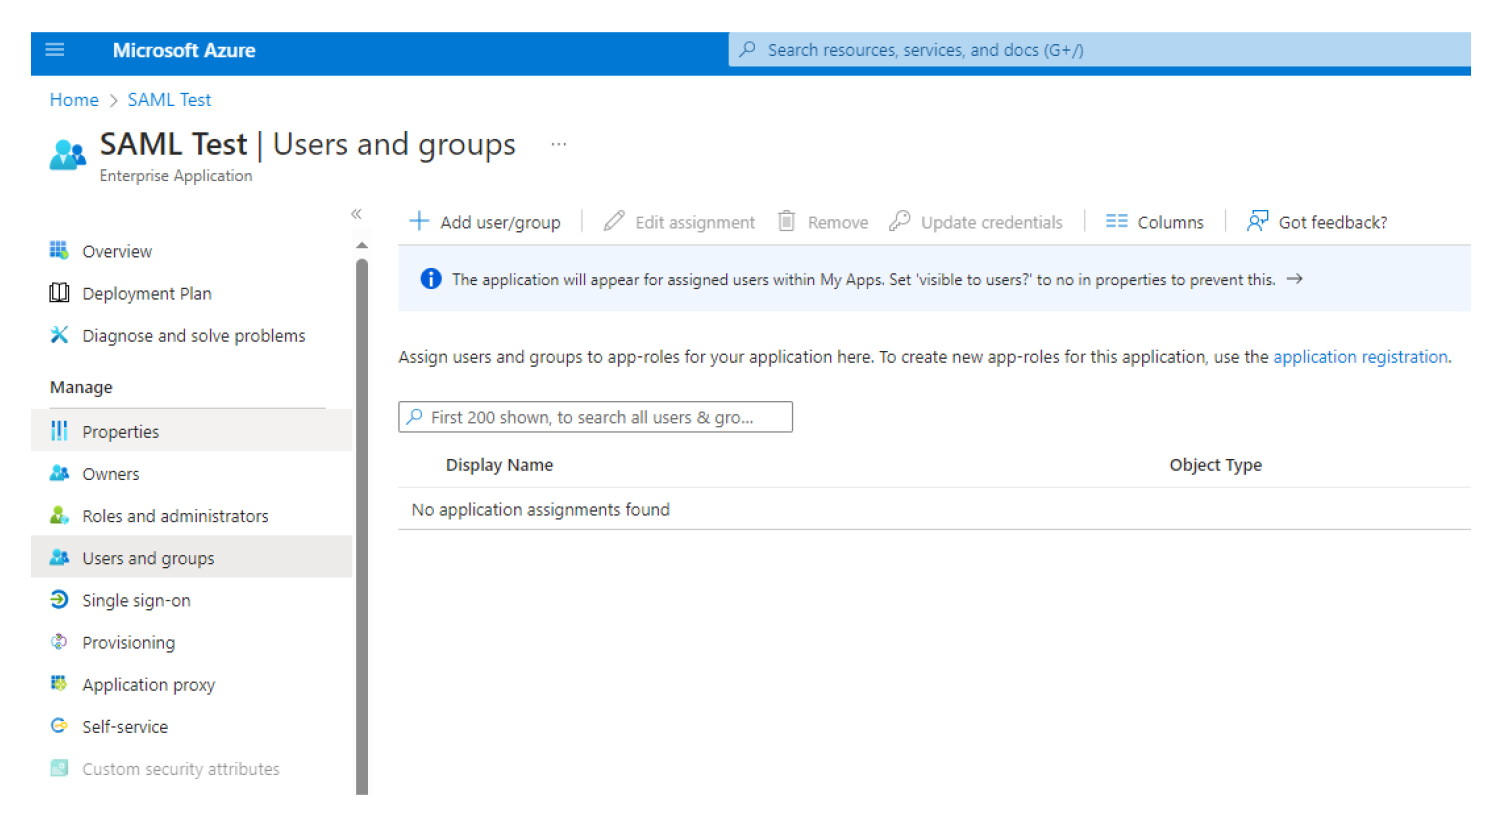 A screenshot showing the Users and groups page.